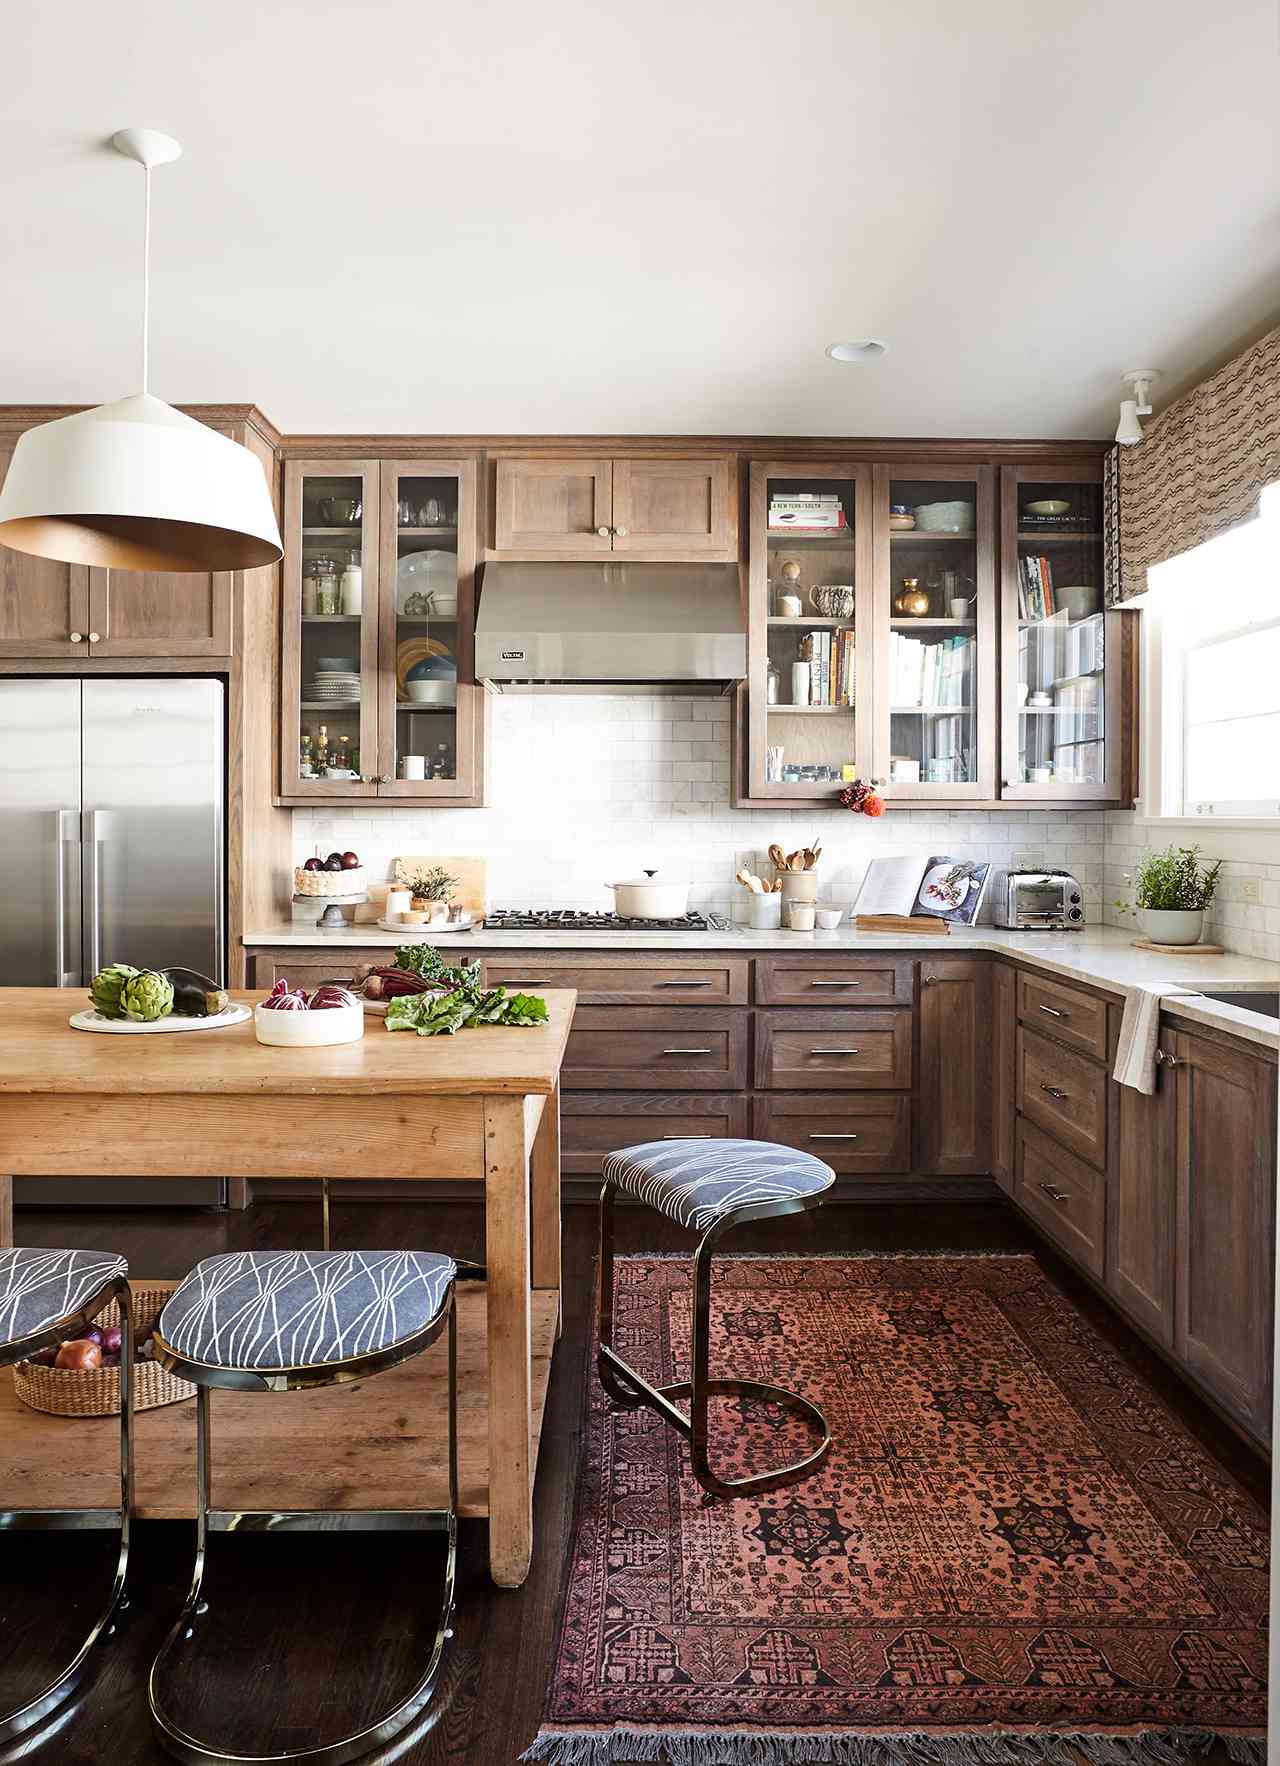 How to Choose Cabinet Materials for Your Kitchen | Better Homes &amp; Gardens